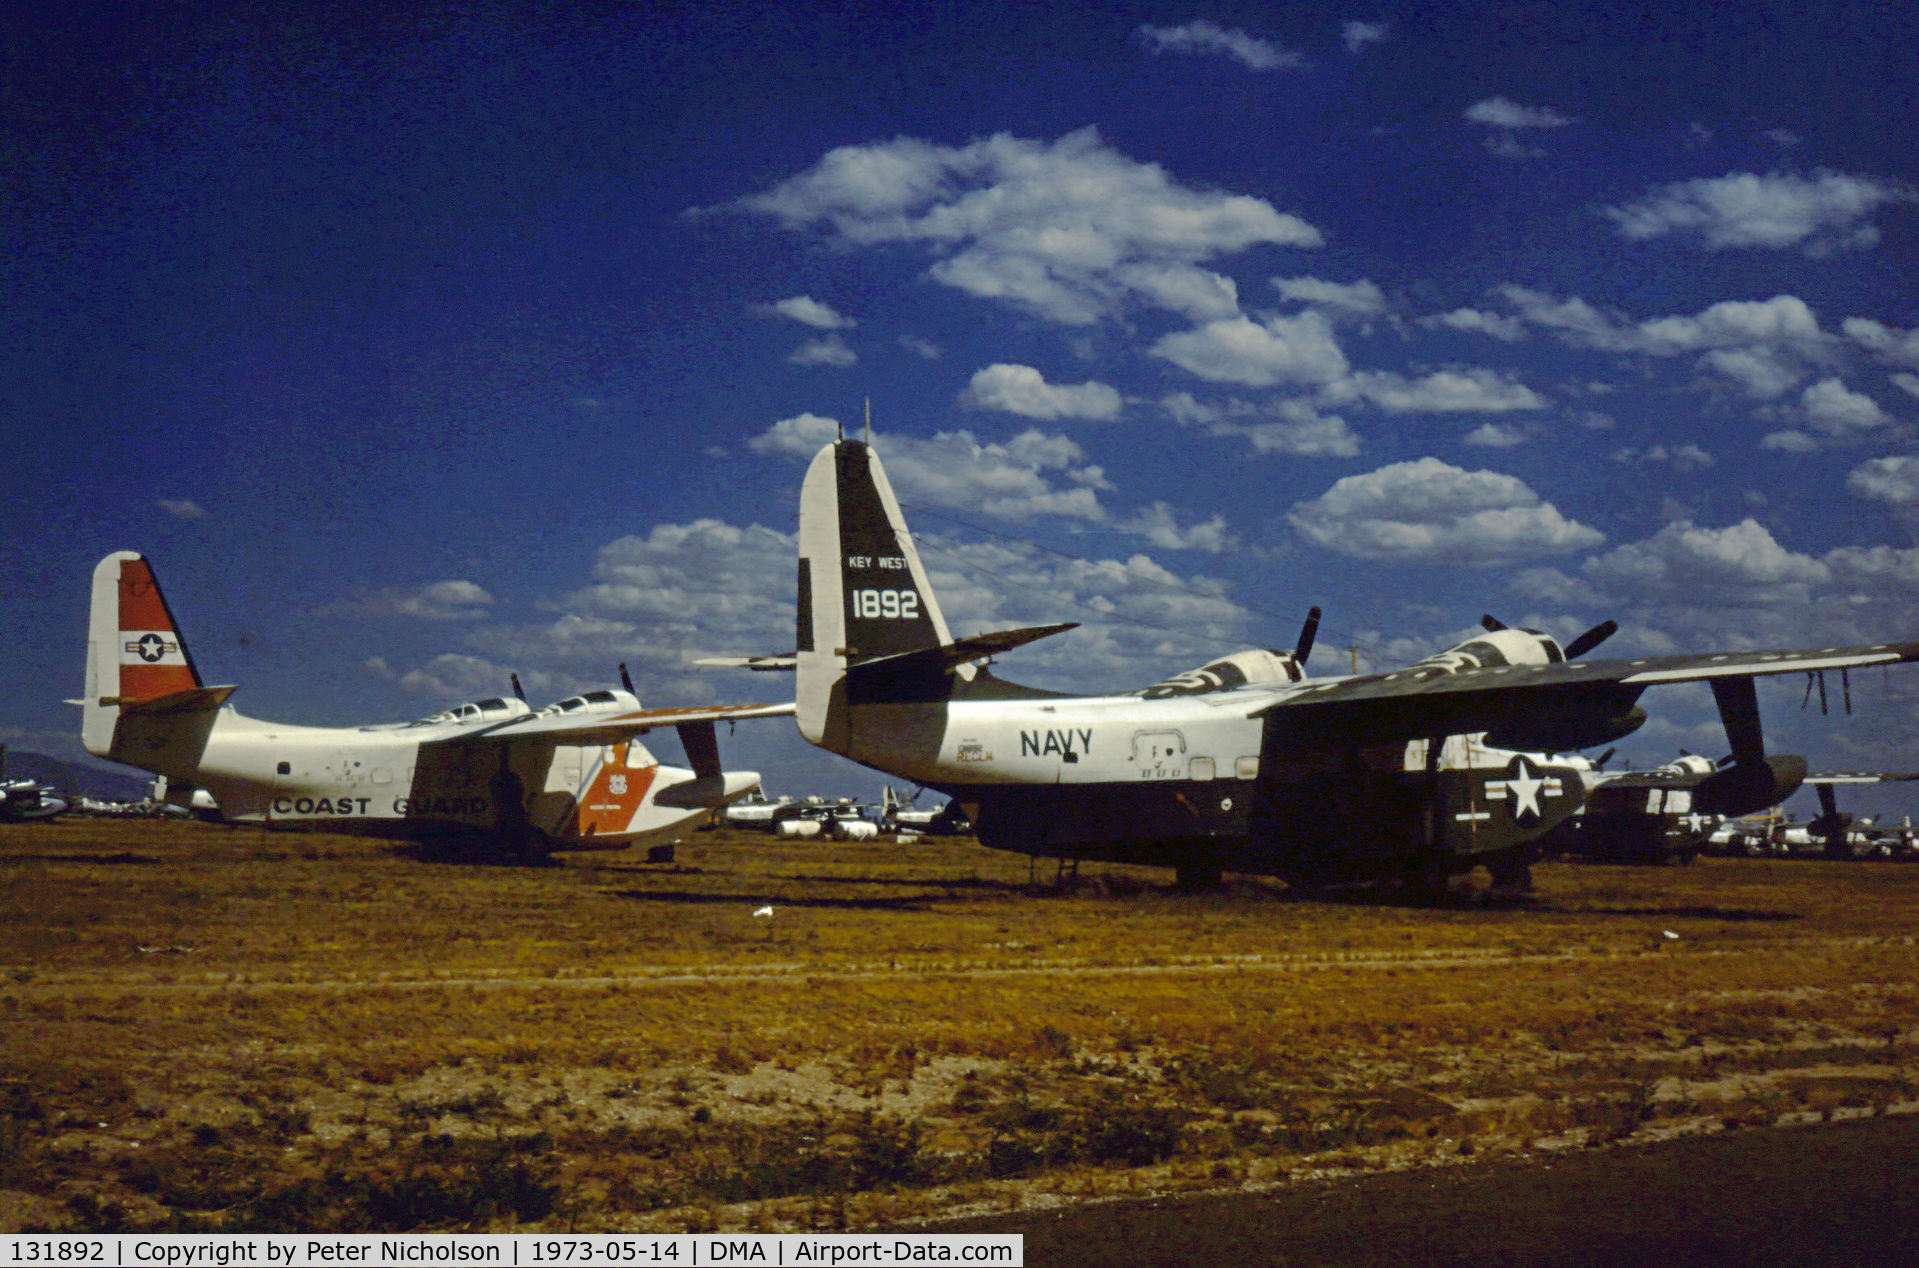 131892, 1953 Grumman HU-16C (UF-1) Albatross C/N G-239, HU-16C Albatross of Naval Air Station Key West in storage at what was then known as MASDC - Military Aircraft Storage & Disposition Centre - at Davis-Monthan AFB.